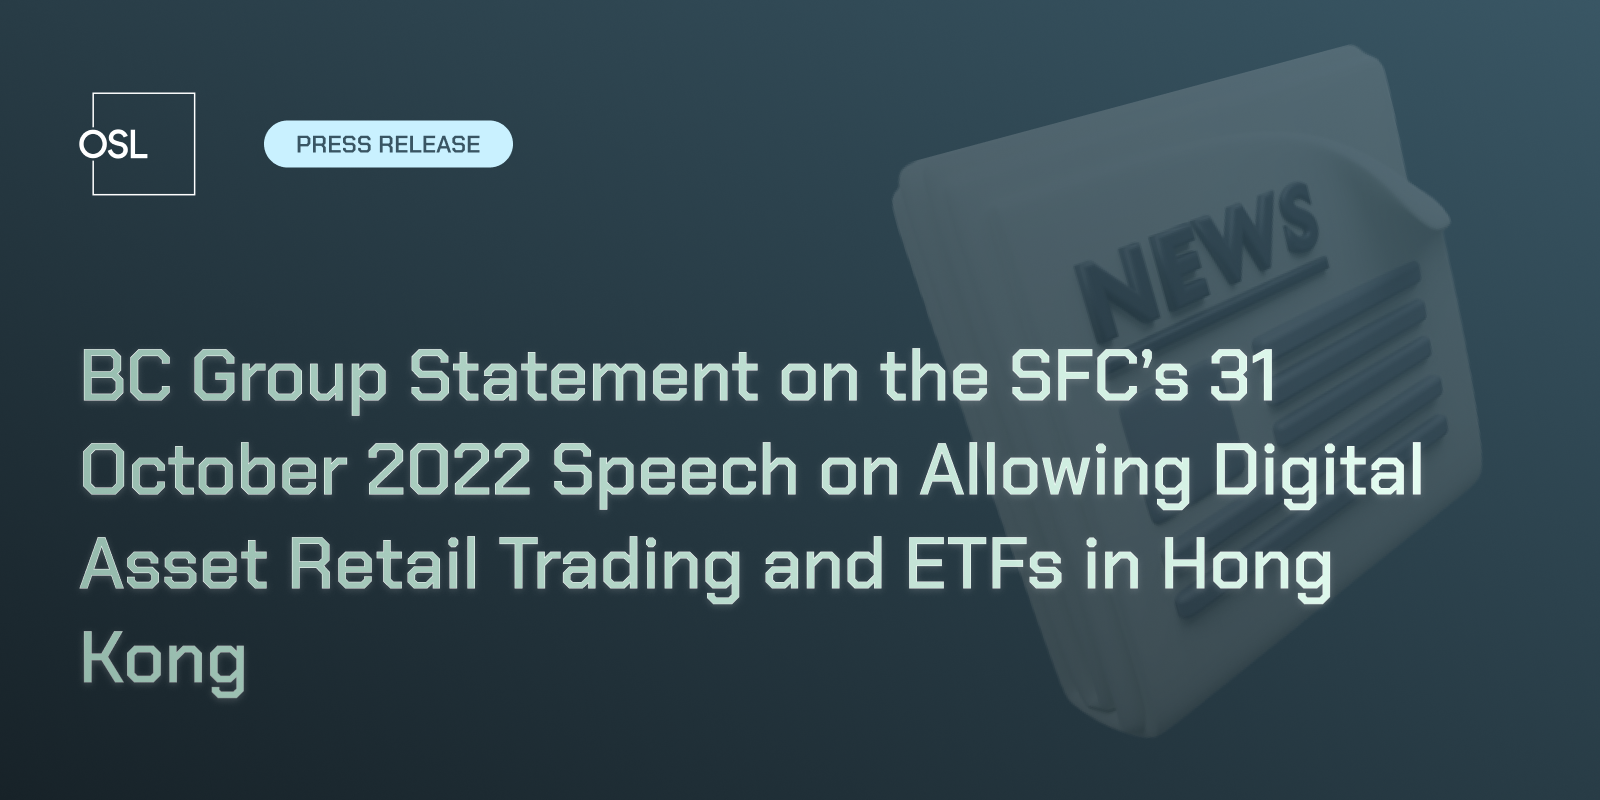 BC Group Statement on the SFC’s 31 October 2022 Speech on Allowing Digital Asset Retail Trading and ETFs in Hong Kong